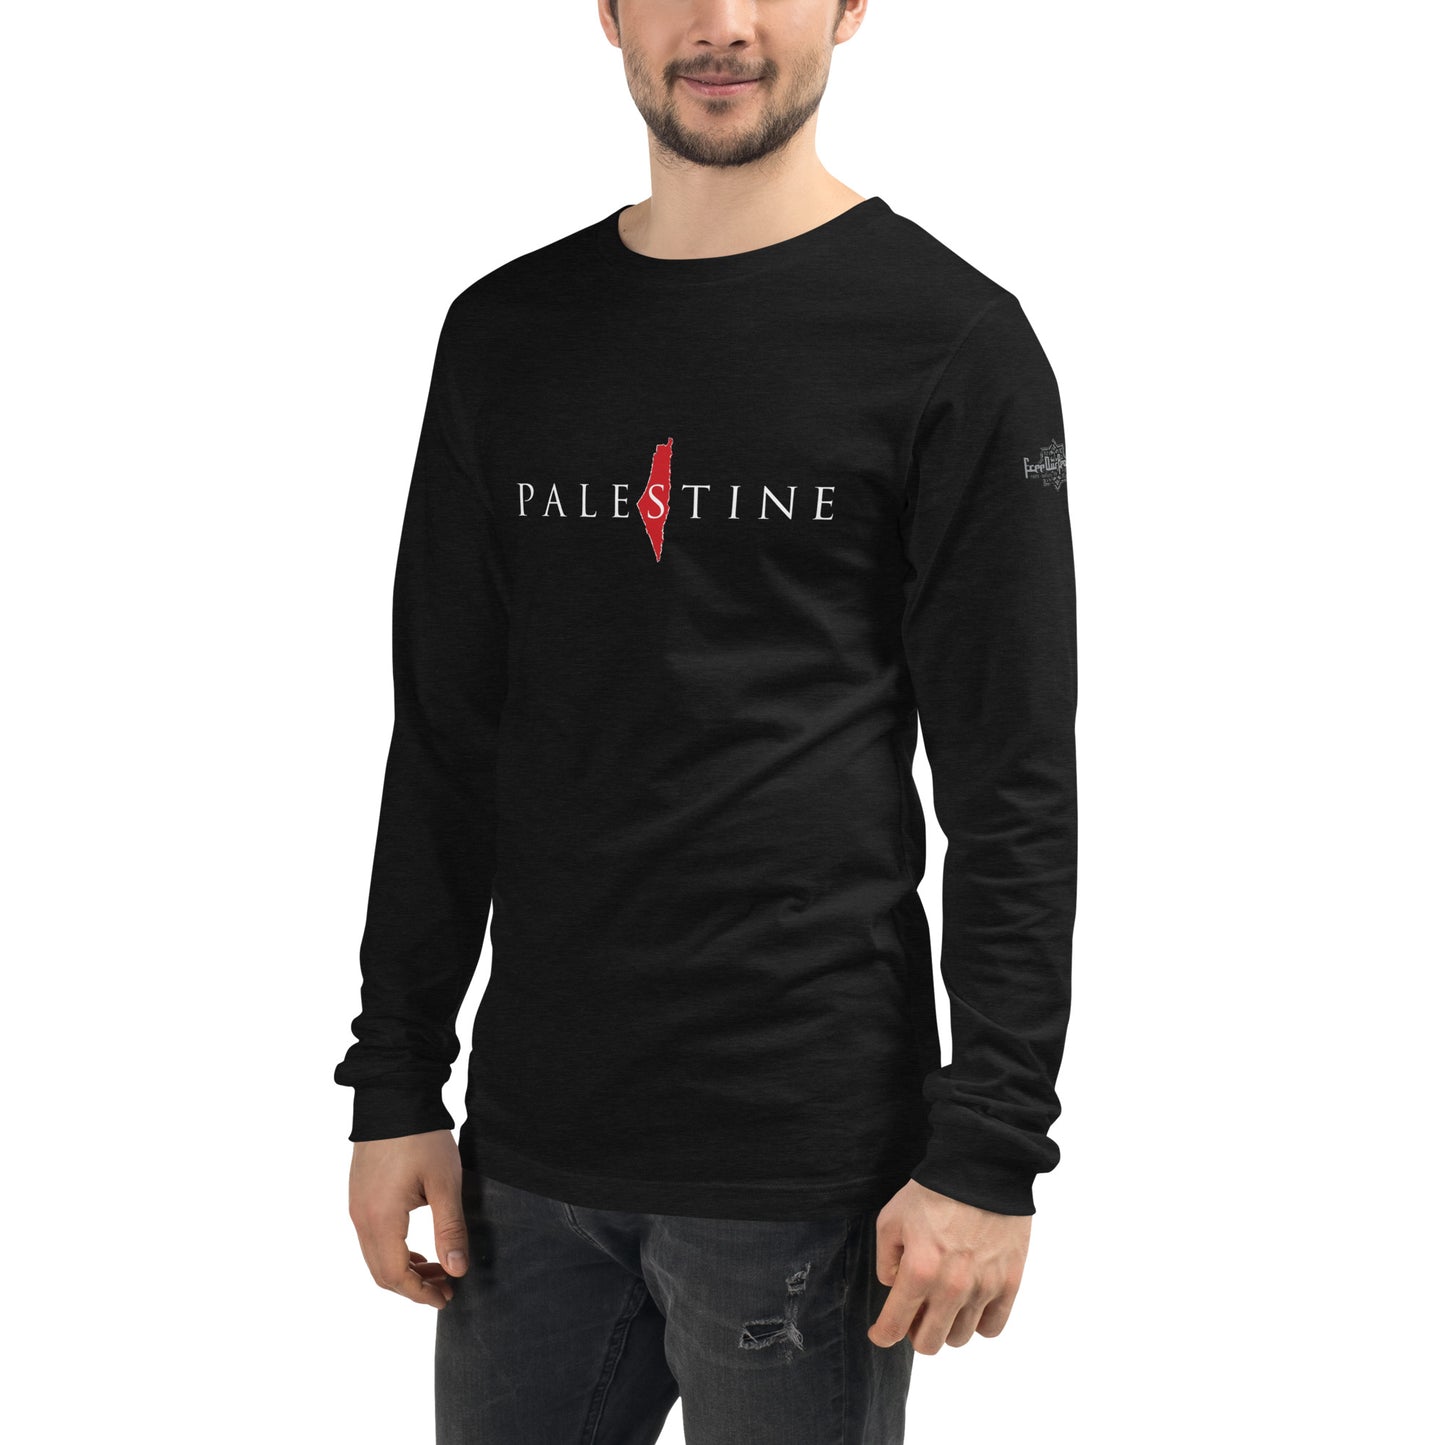 My Roots Lie in the Soil of Palestine - Long Sleeve